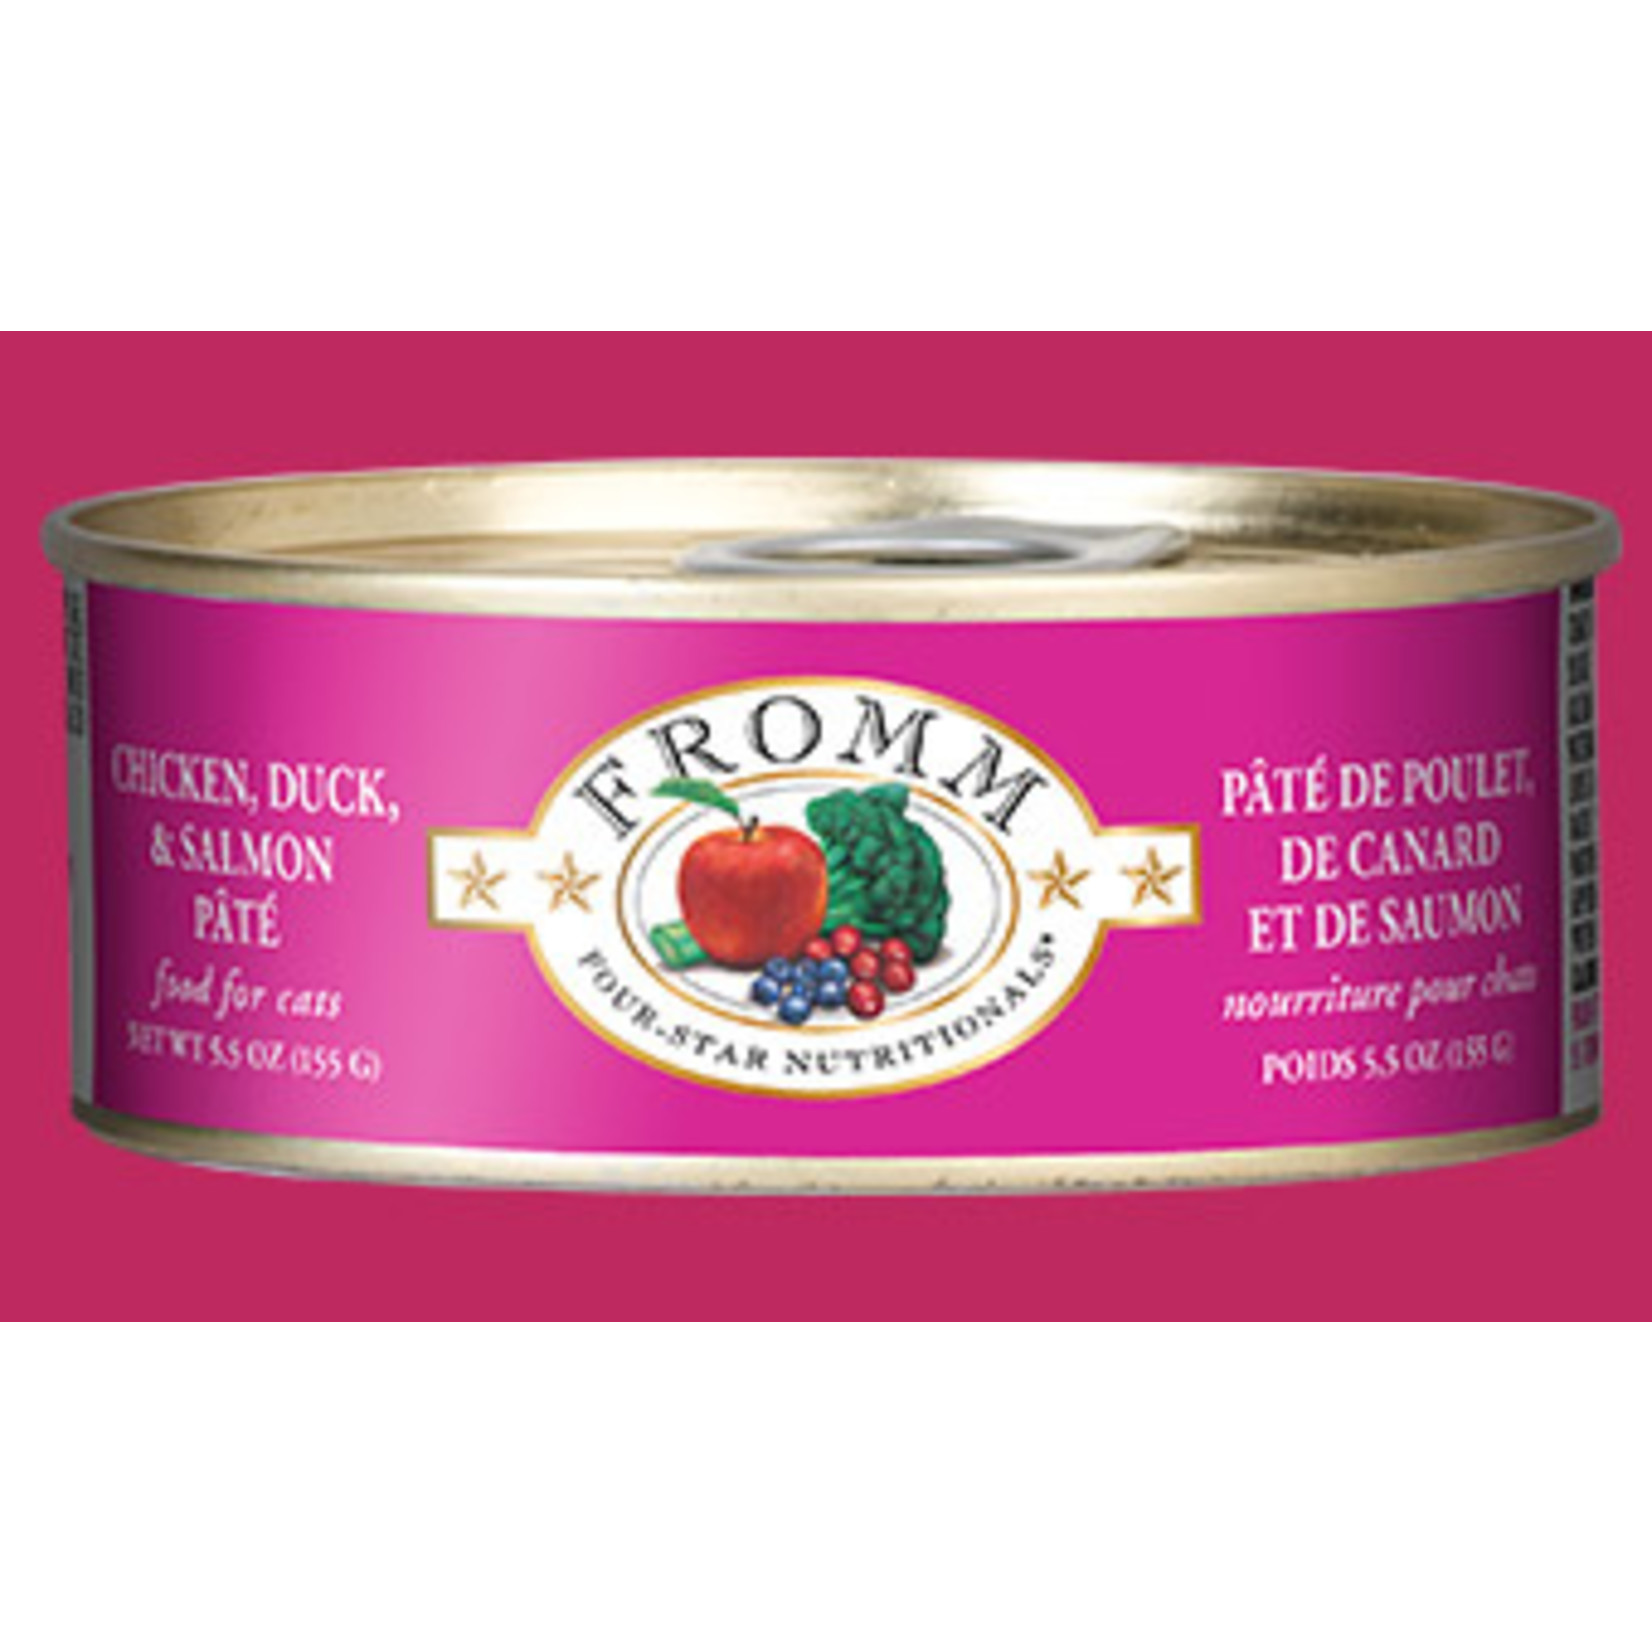 Fromm Fromm Wet Cat Food Four Star Nutritionals Chicken, Duck, & Salmon Pate 5.5oz Can Grain Free